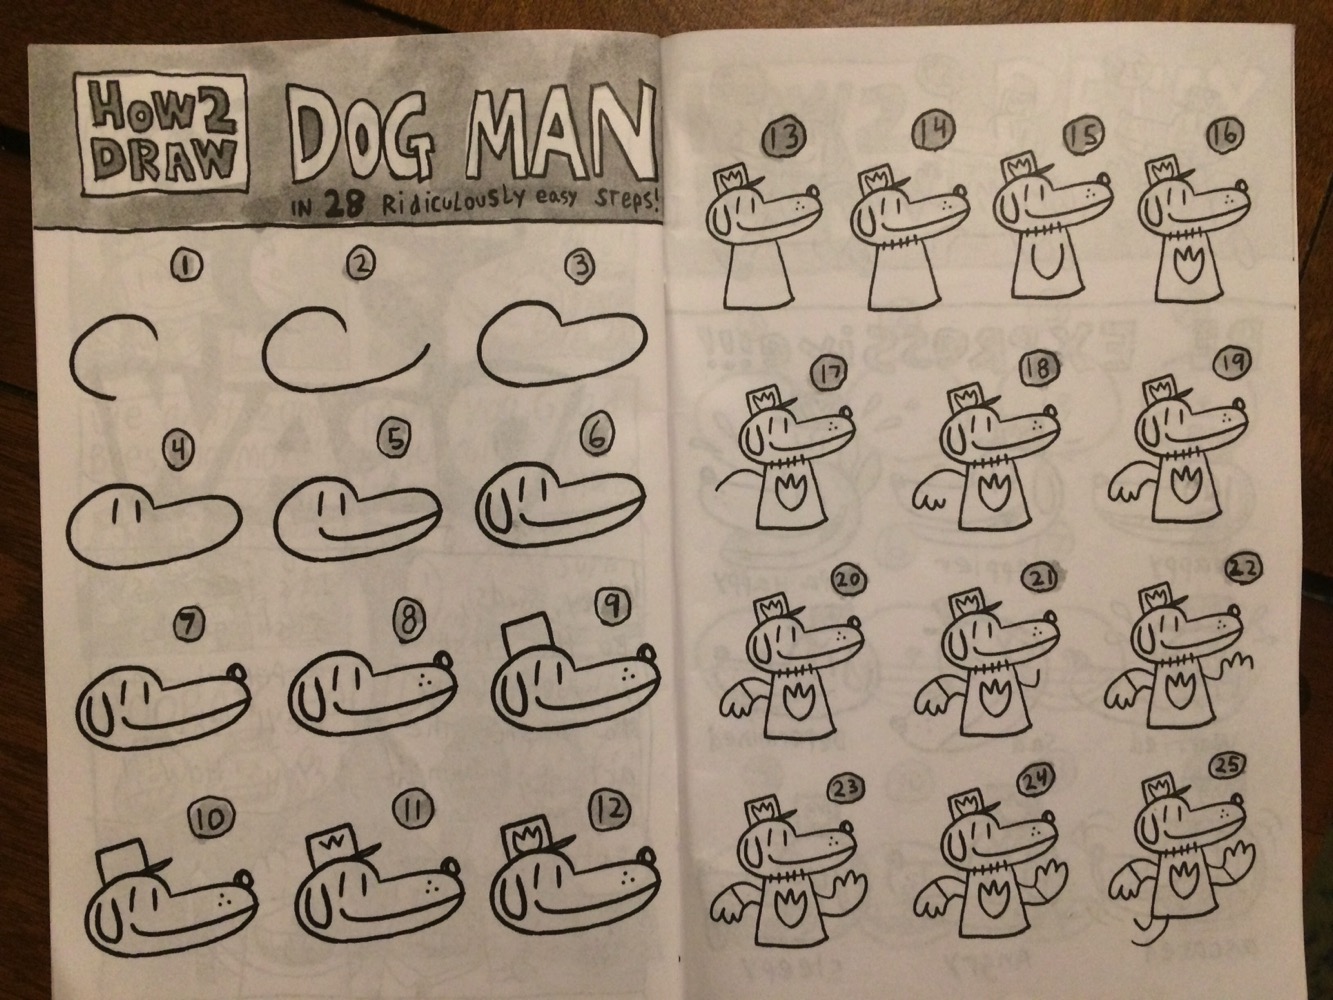 Instructions for drawing Dogman